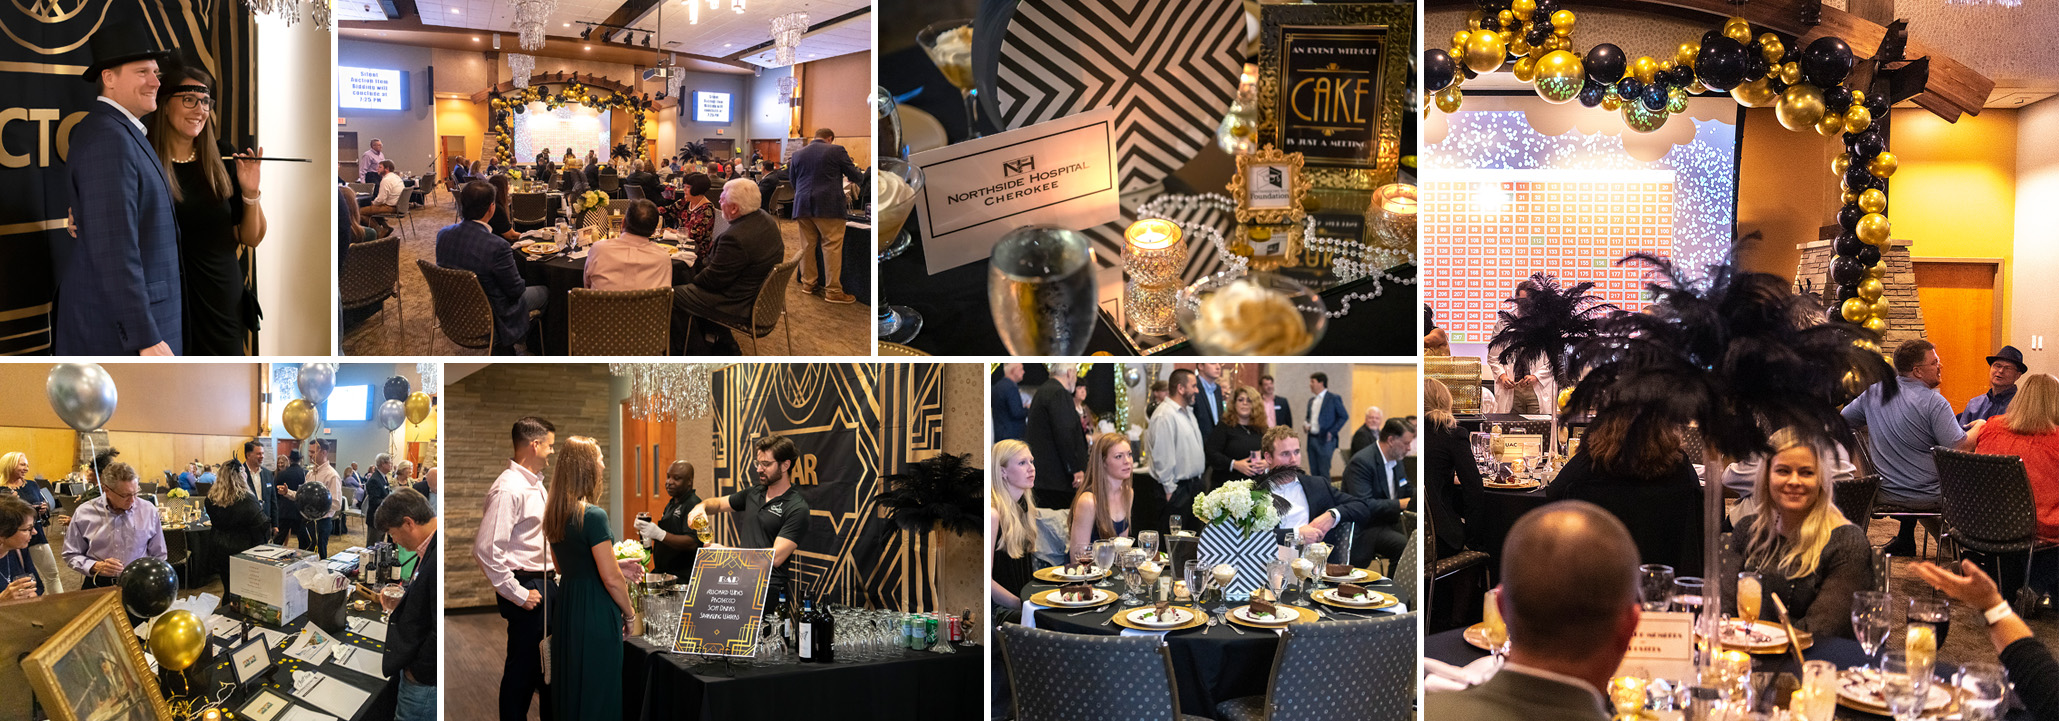 A collage of reverse raffle guests dressed in nice clothing with decor in background such as balloons and banners and tables set with delicious food